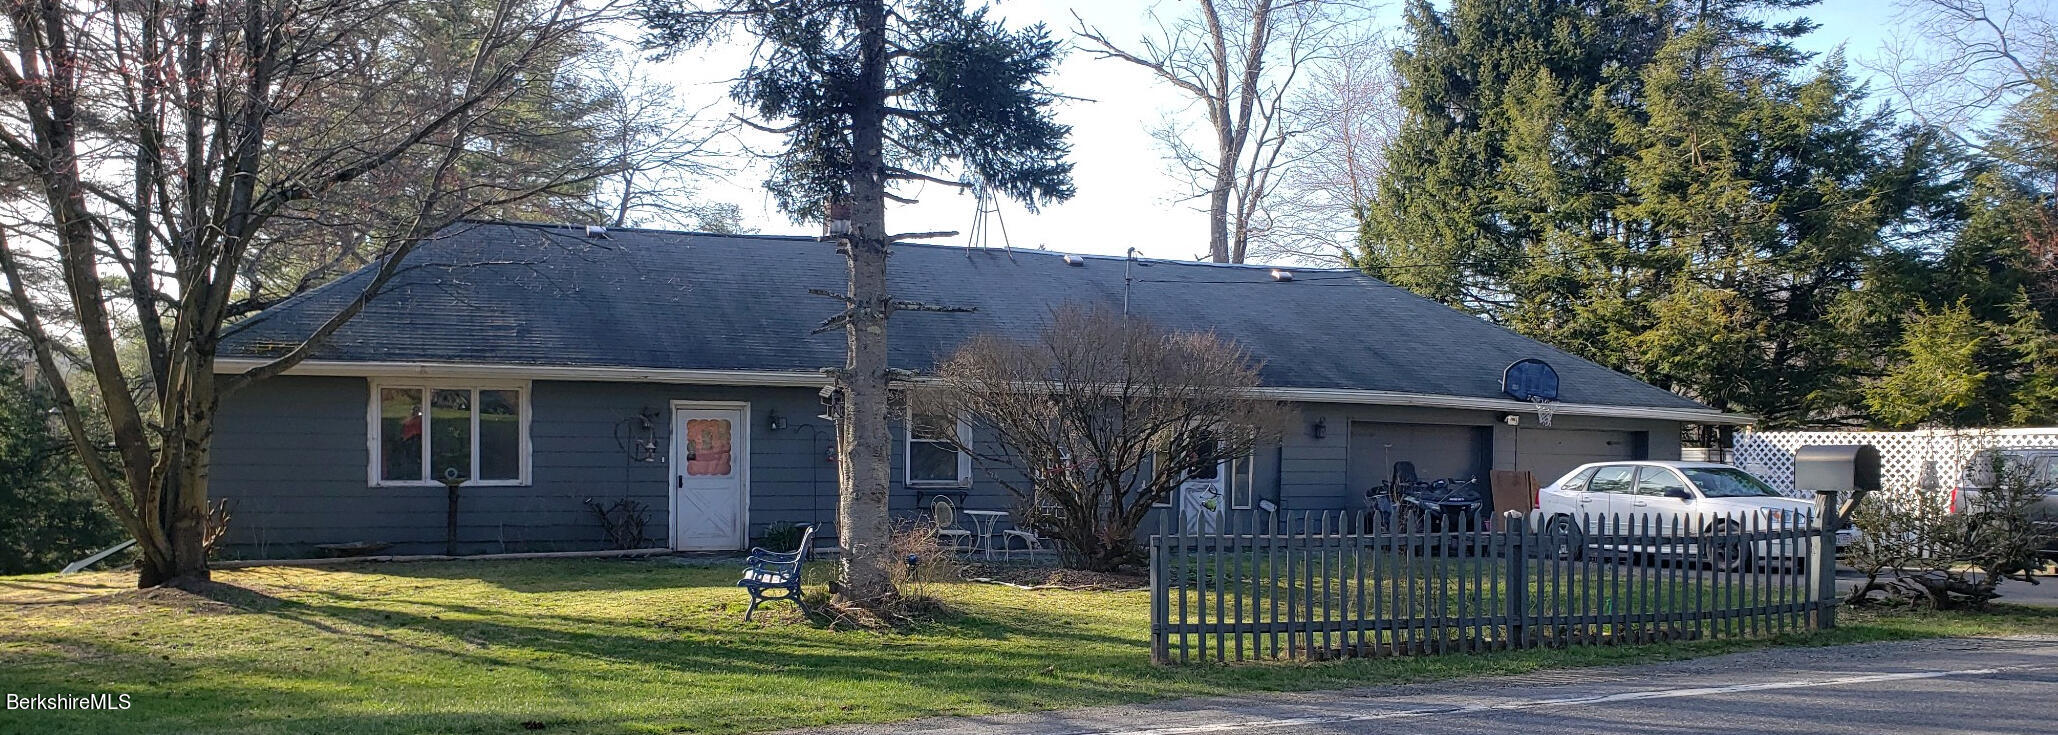 a view of house with a yard and a large tree